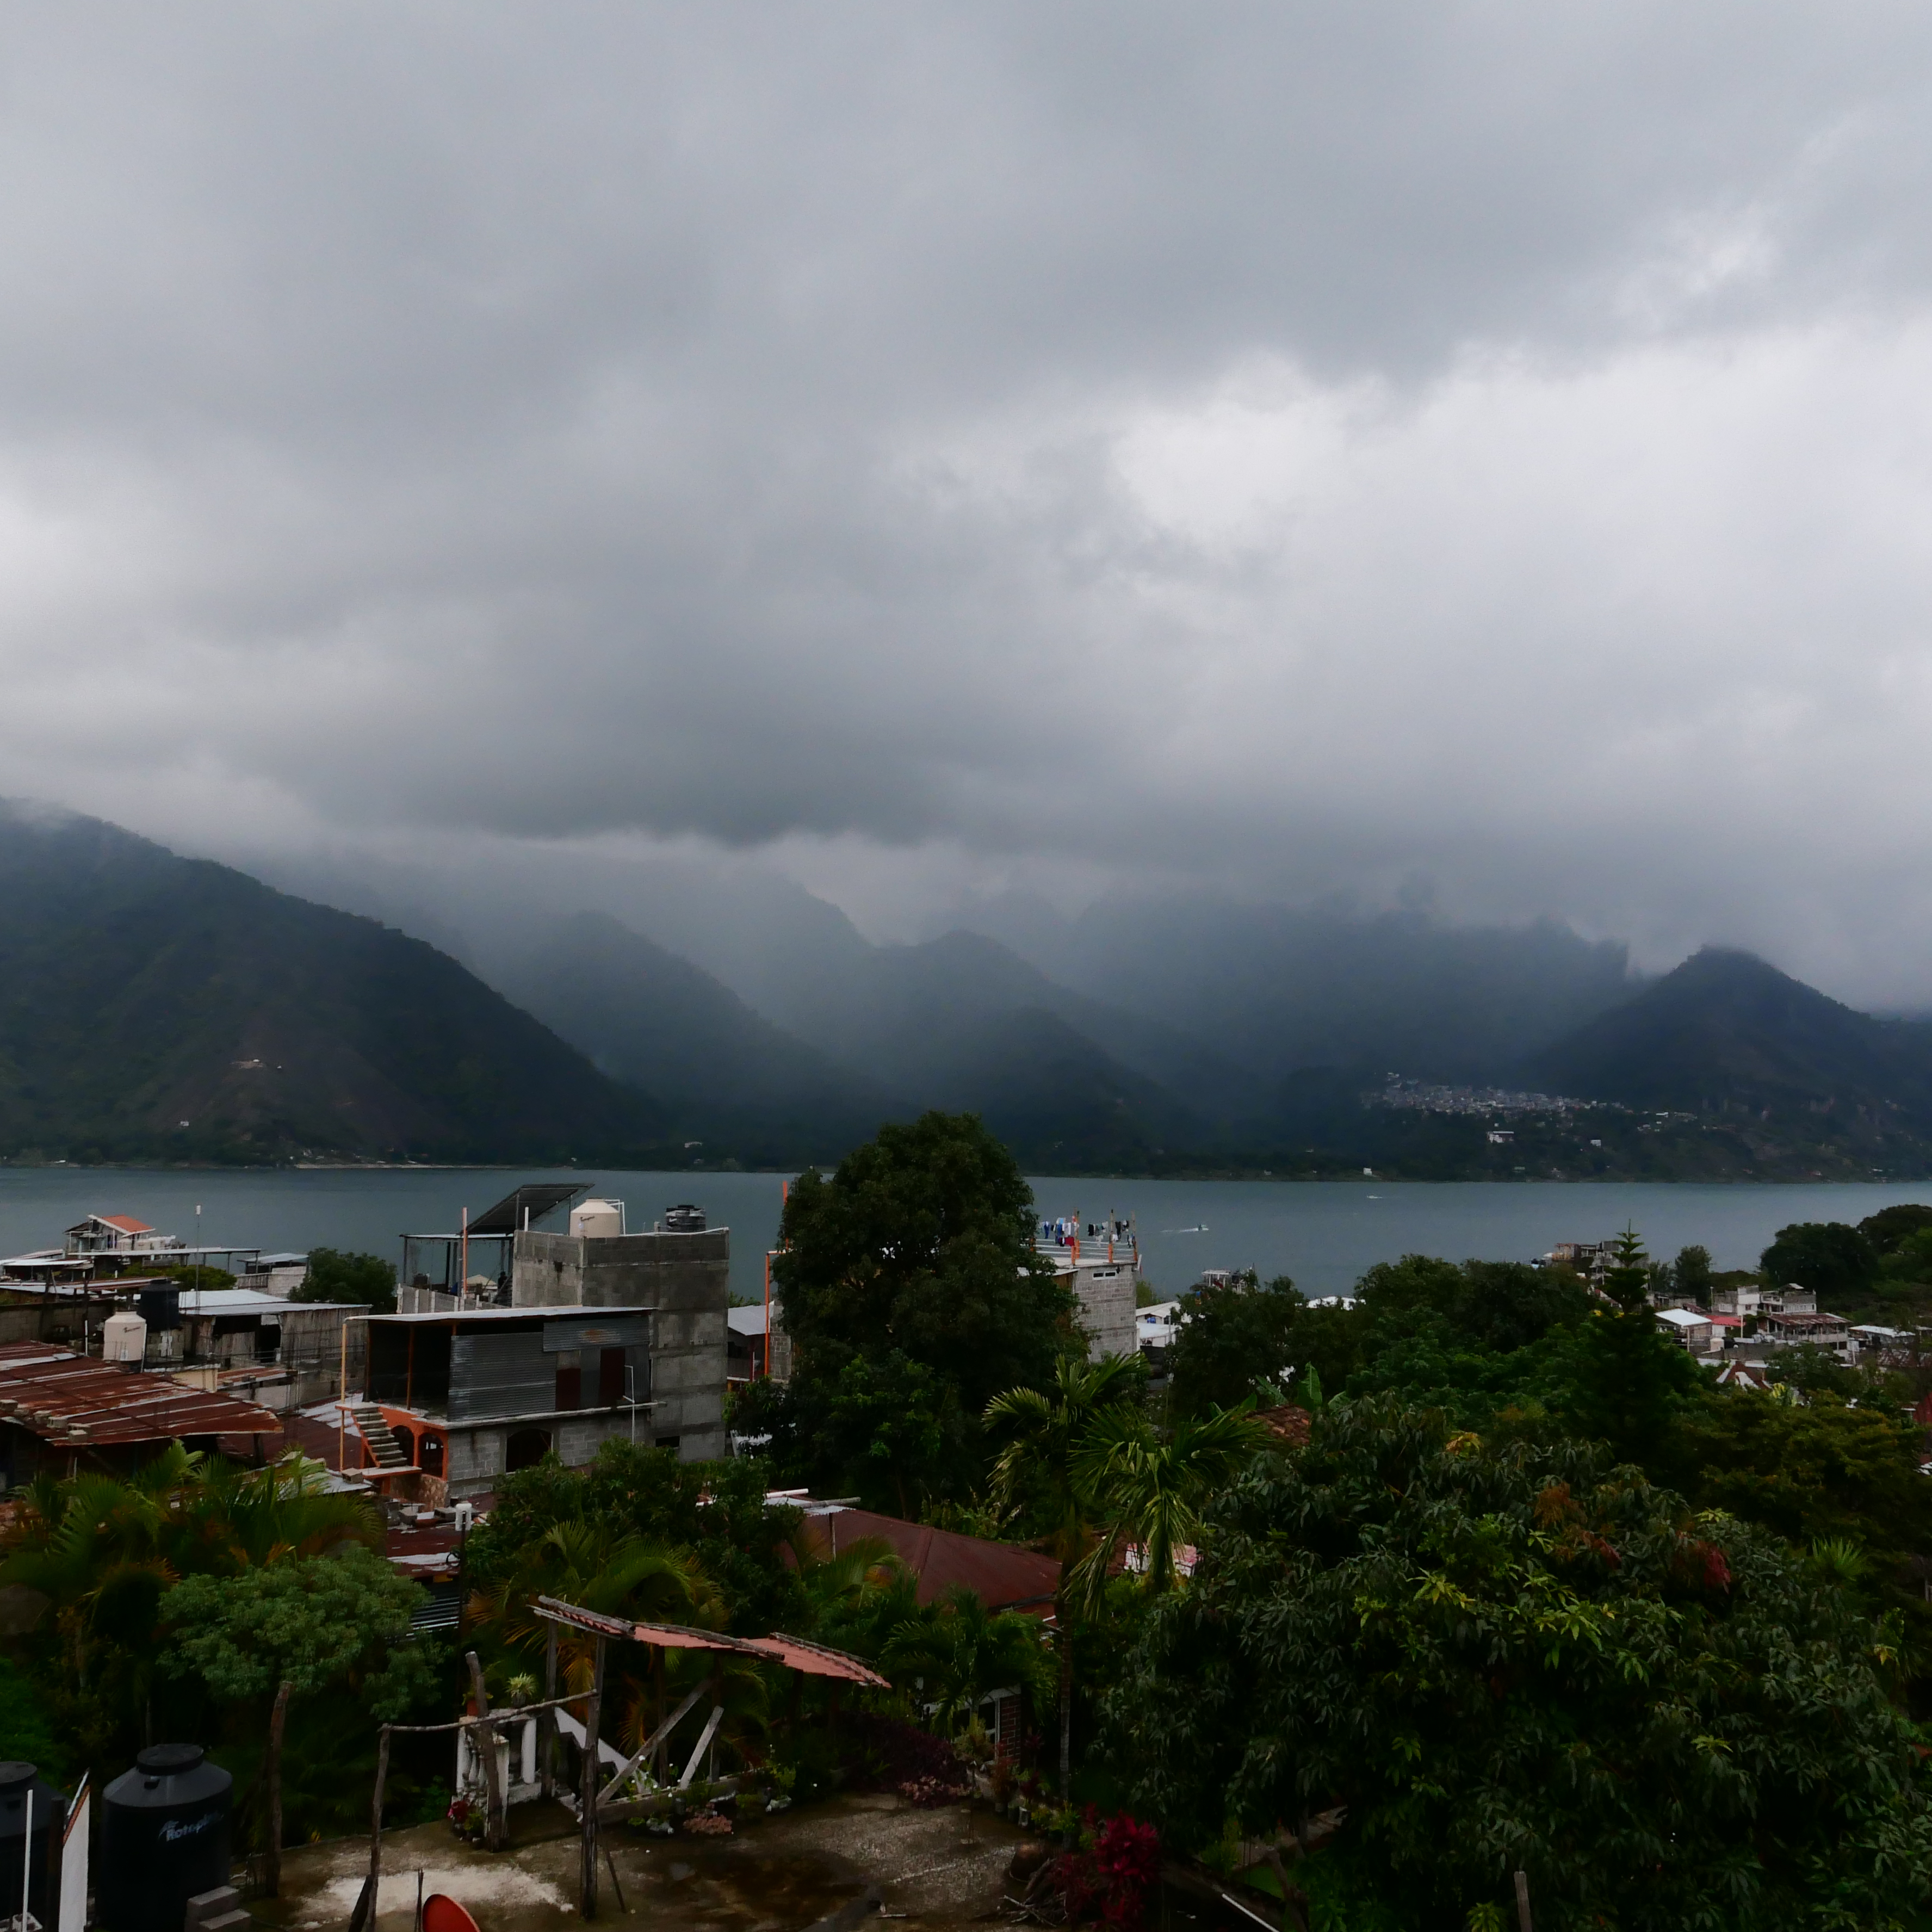 A photo from a balcony in a Lake Atitlan town, of the skyline with the buildings in front of them, the lake, and the mountains, with layered clouds covering much of them.